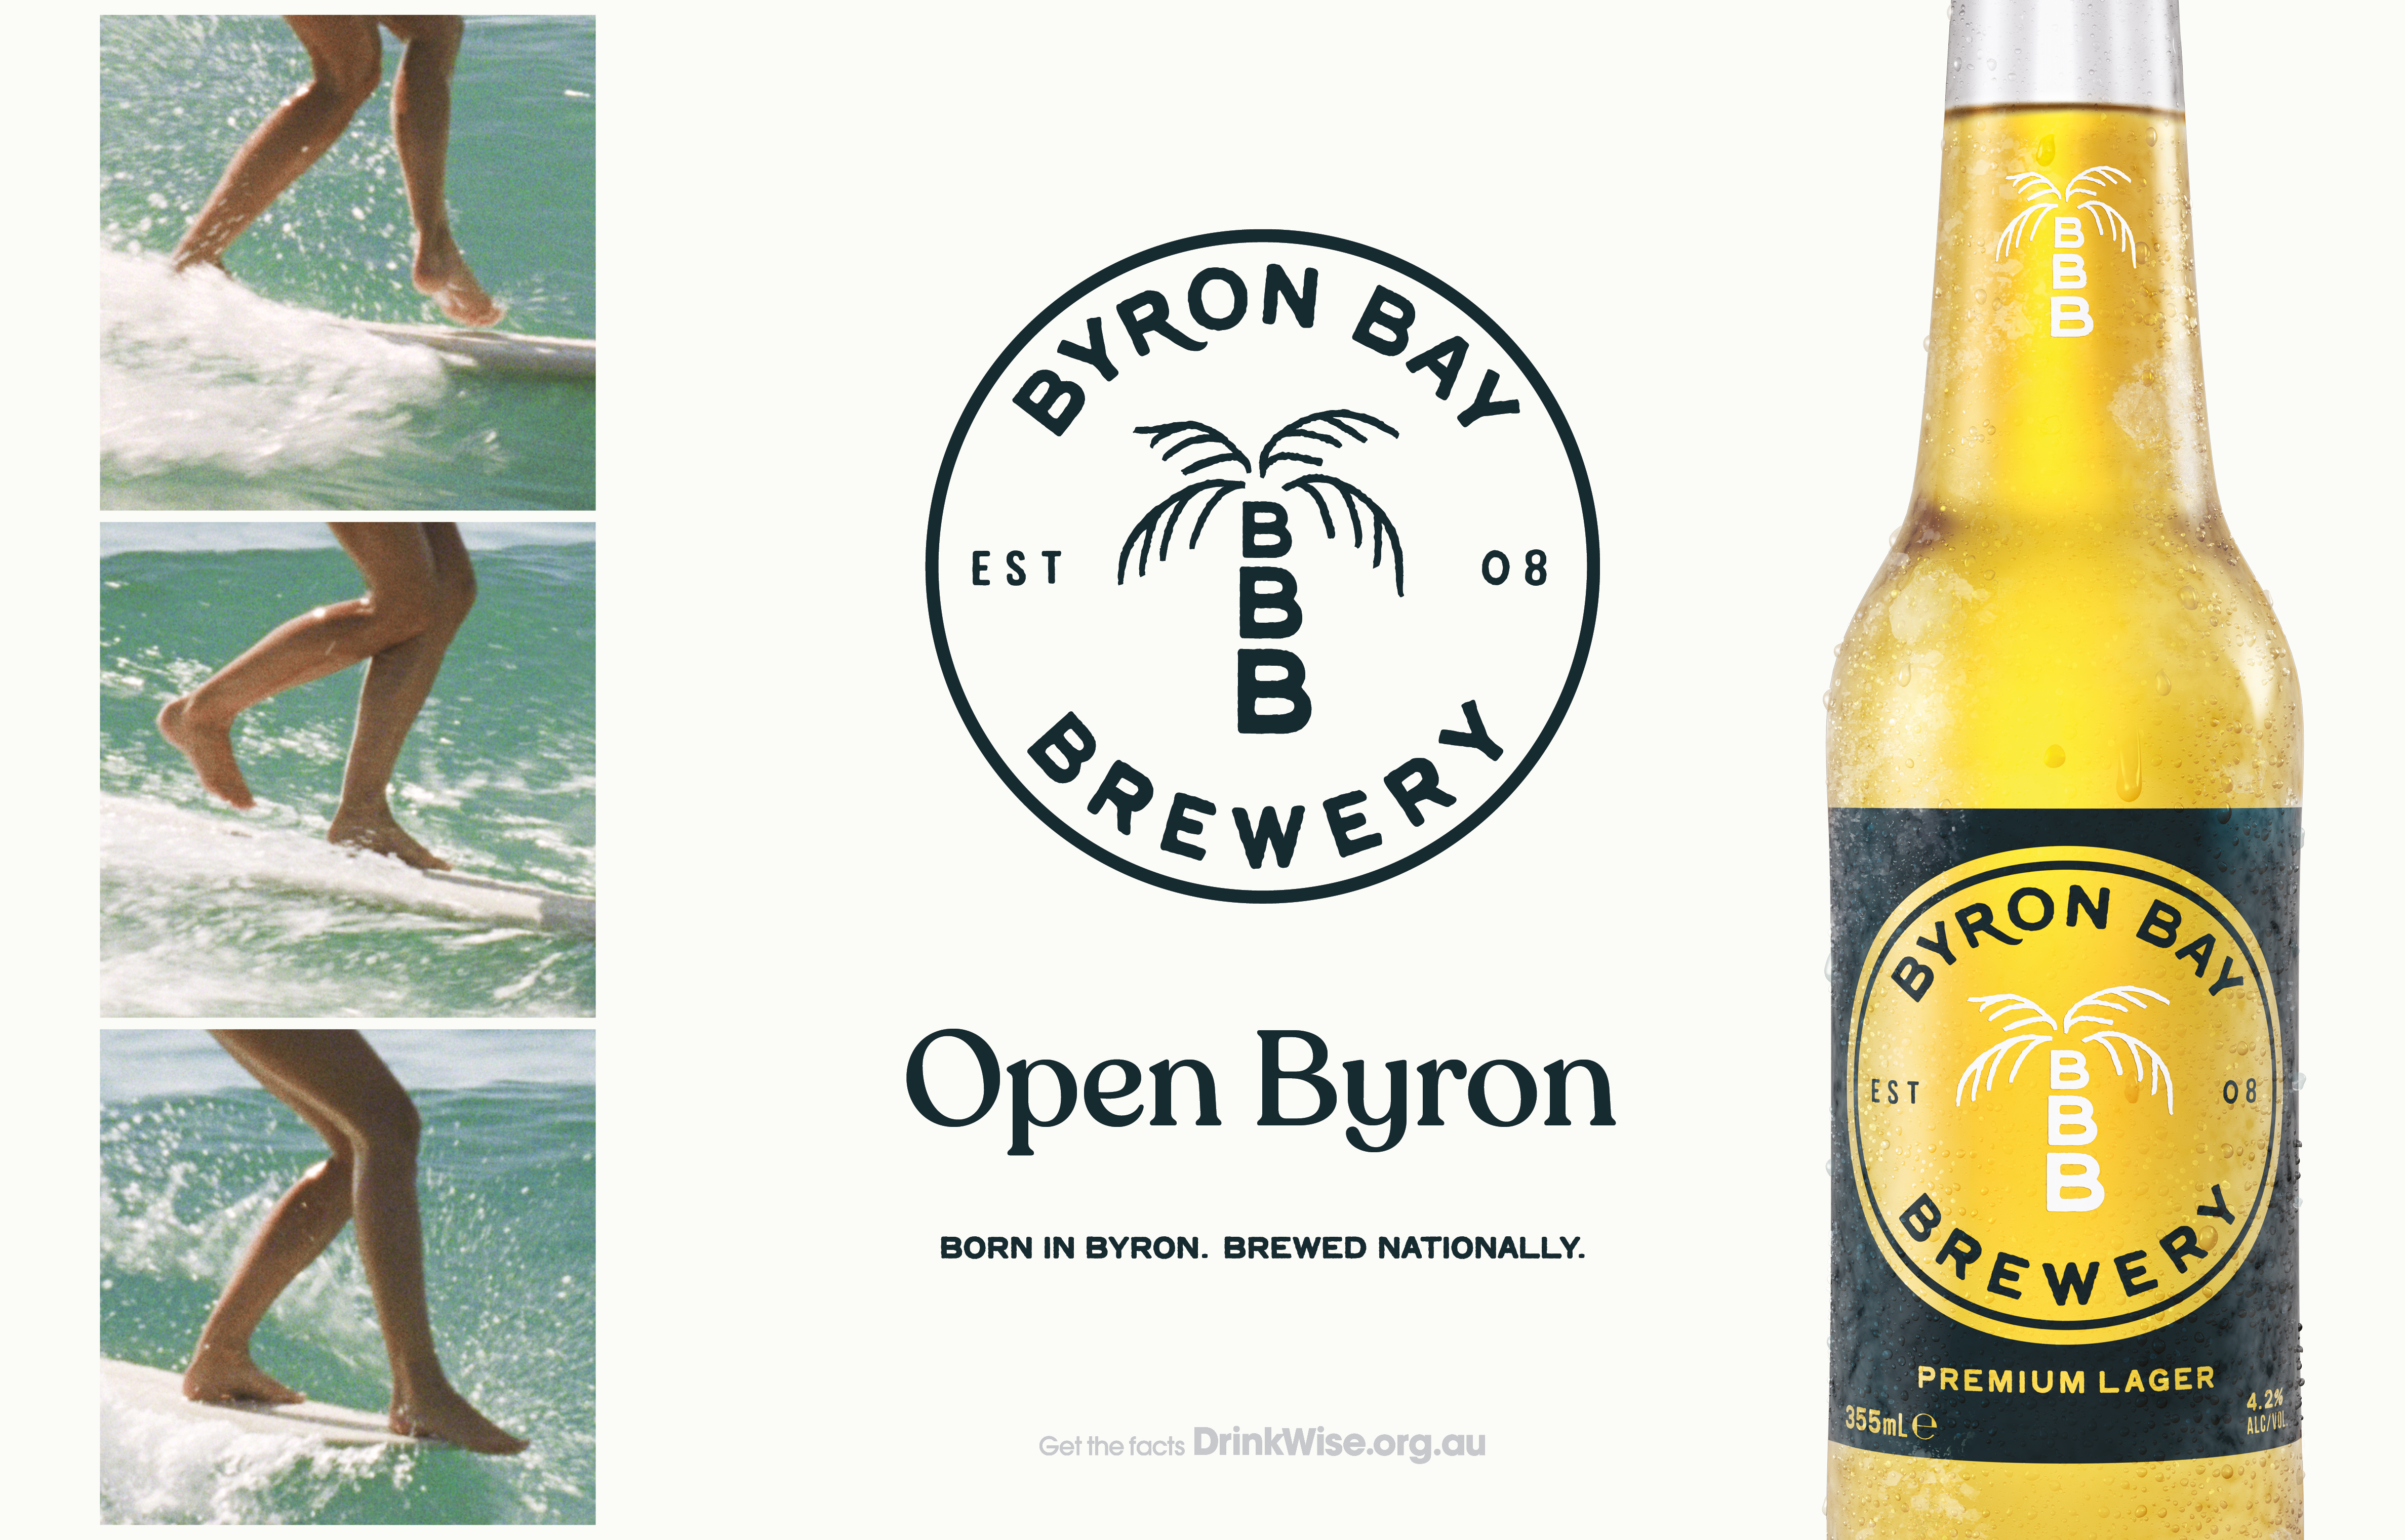 Byron Bay Brewery Premium Lager Brewed To Refresh